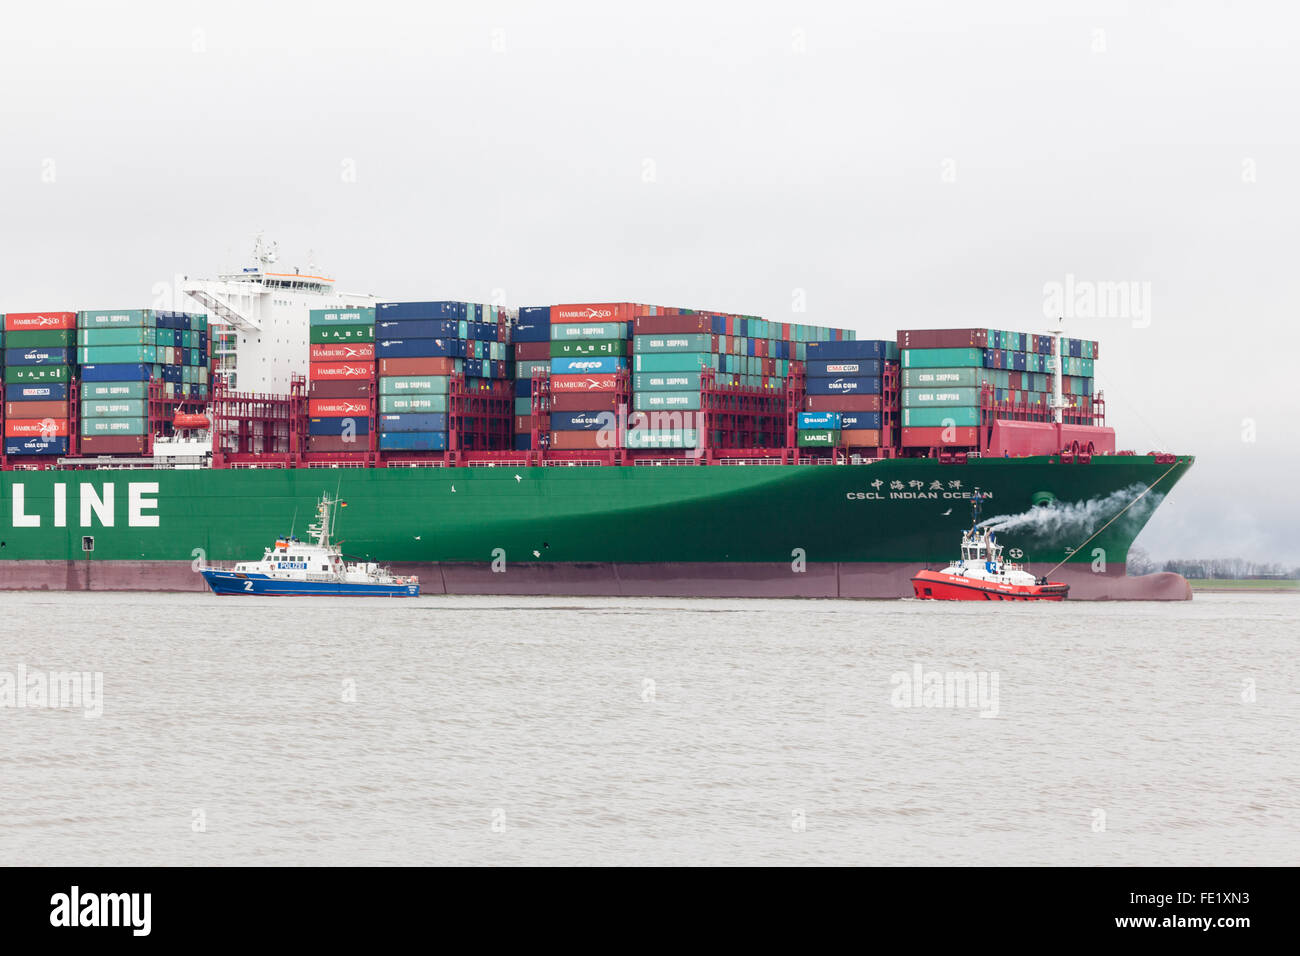 Grünendeich, Germany - February 4th, 2016: Tugboat trying to rescue Chinese container vessel CSCL Indian Ocean that ran aground in the Elbe river, police boat in front. Stock Photo